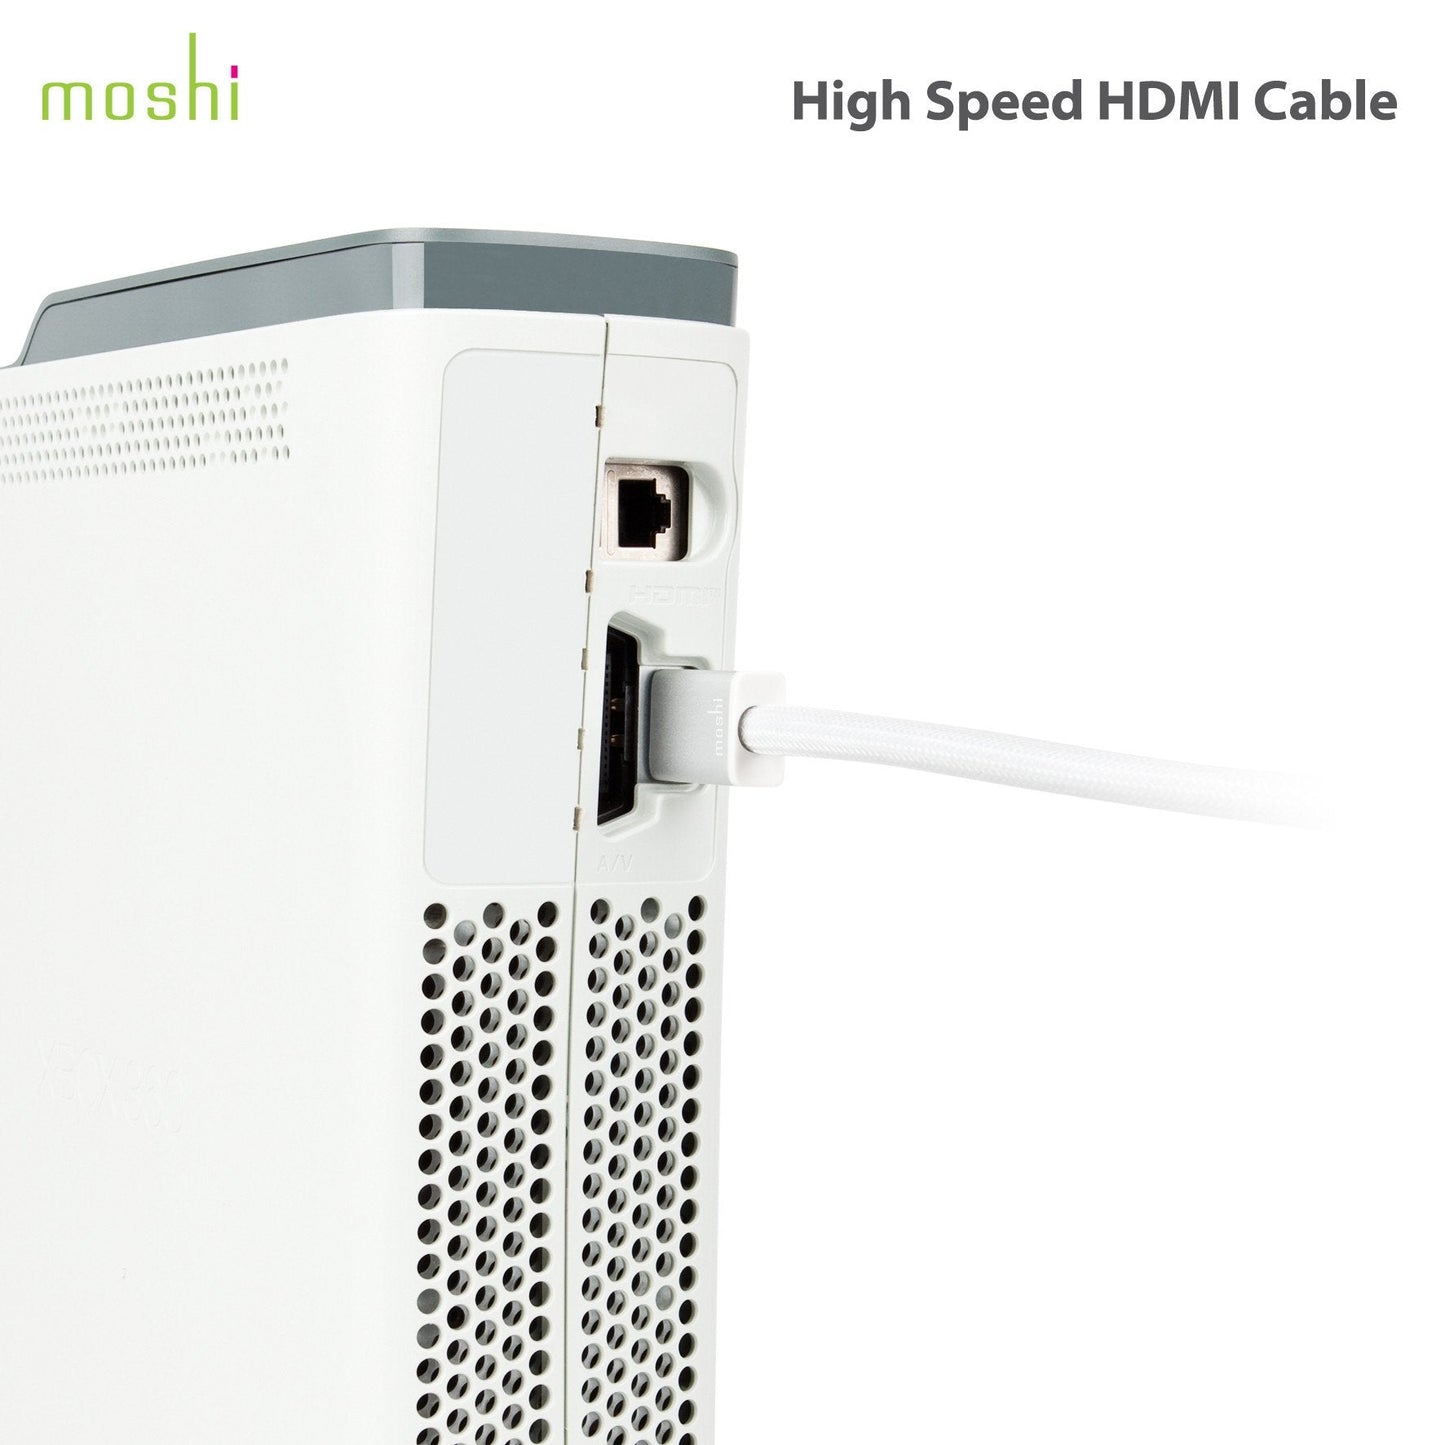 Moshi High Speed HDMI v1.4 Cable 10.2GBPS, 4K, 2 Meter